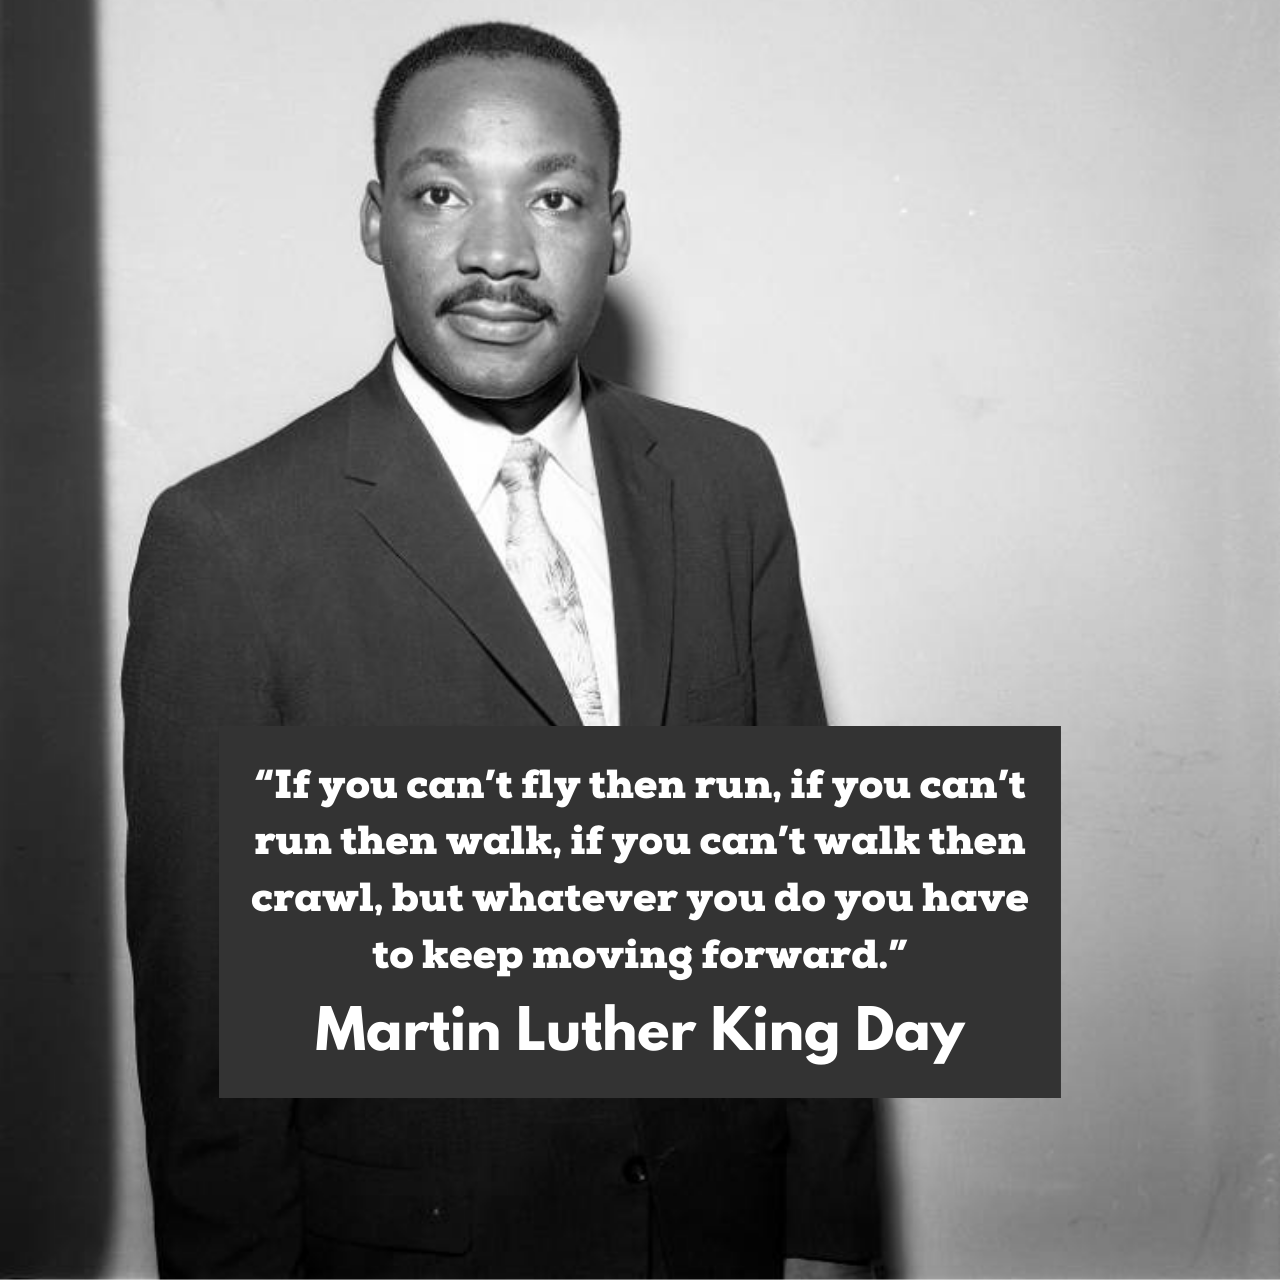 Martin Luther King Day 2022: Quotes, Slogans, HD Images, Instagram Captions, Social Media Posts to Share